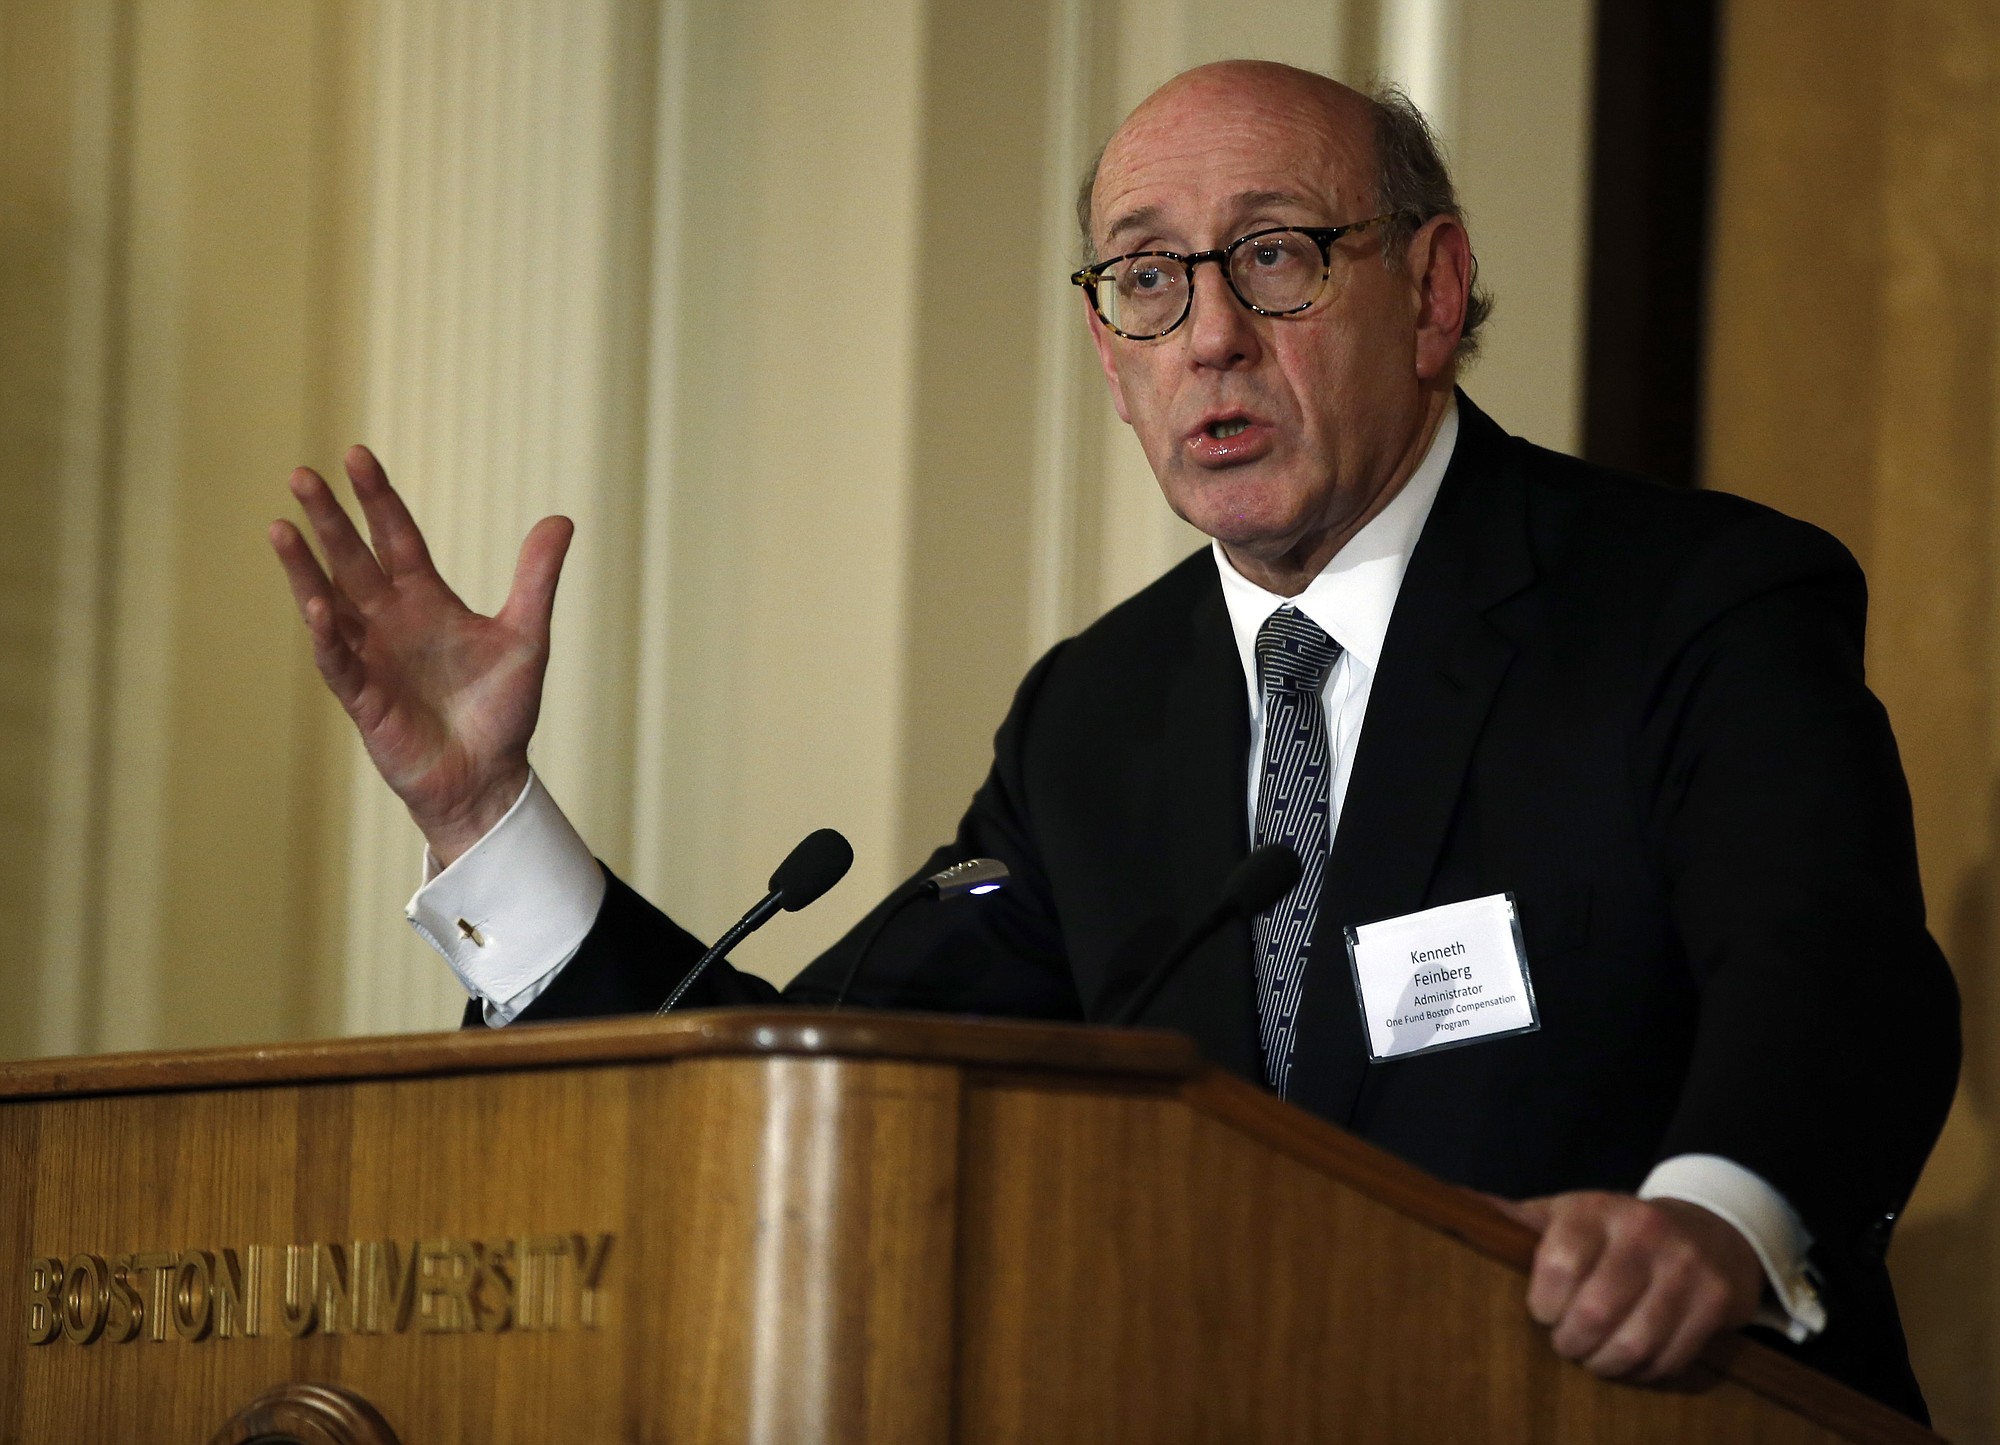 Kenneth Feinberg, administrator of the One Fund Boston Compensation Program, speaks at a forum at Boston University in Boston.